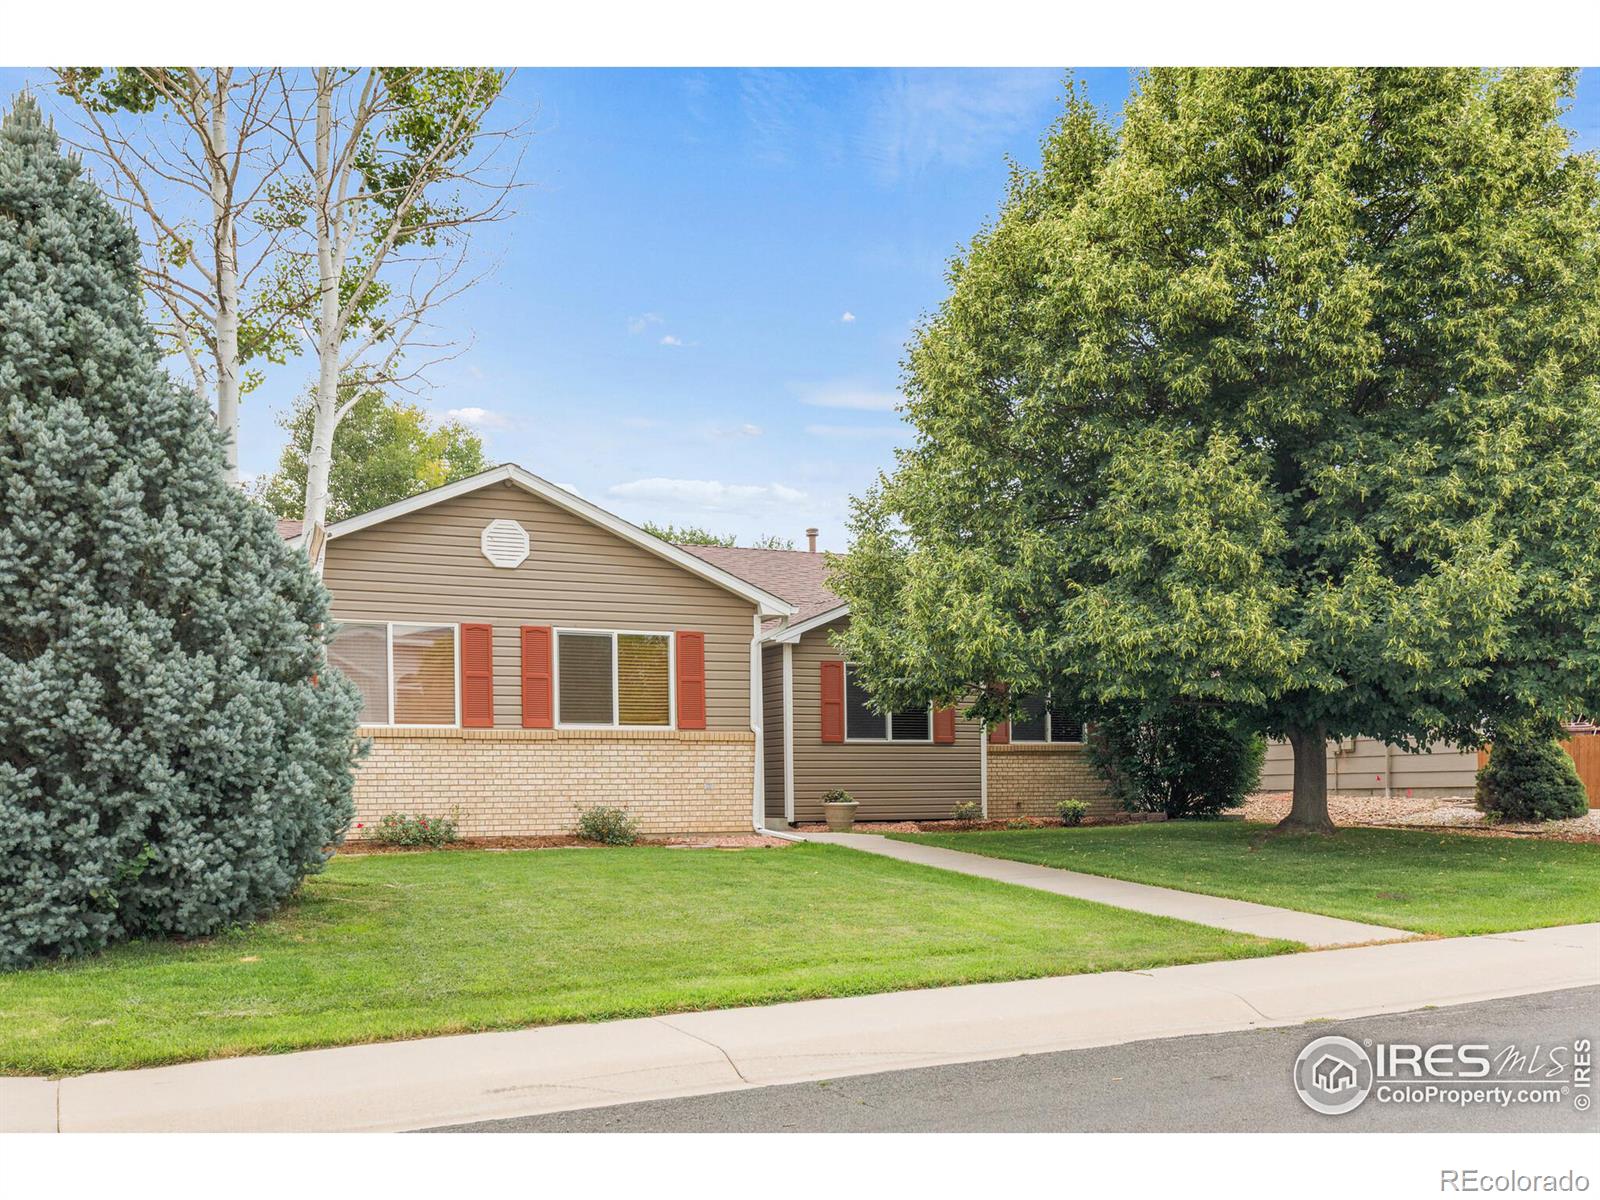 122  49th Ave Pl, greeley MLS: 123456789994108 Beds: 5 Baths: 3 Price: $459,900